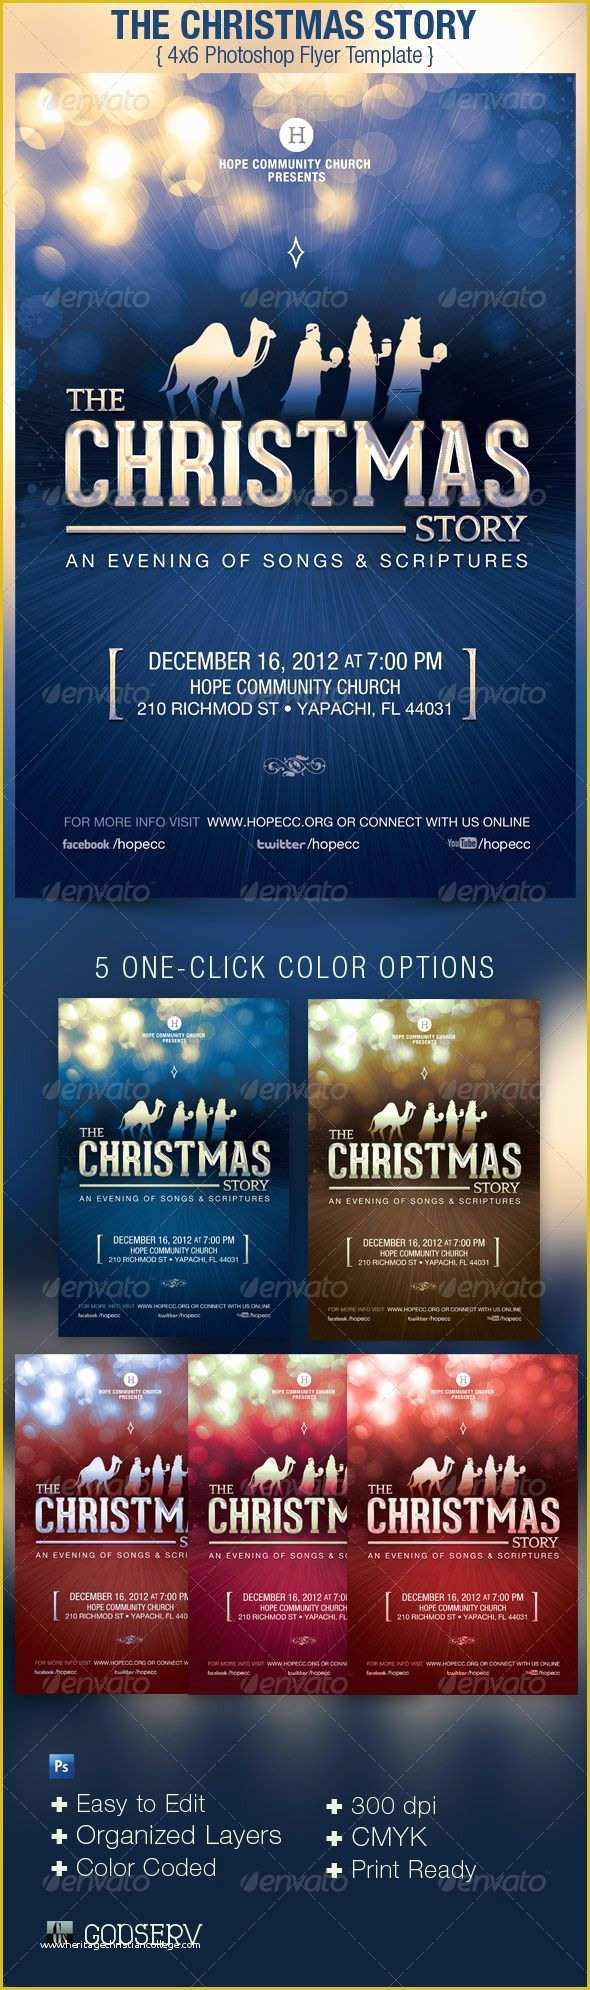 Religious Flyer Templates Free Of 274 Best Church Flyers Images On Pinterest